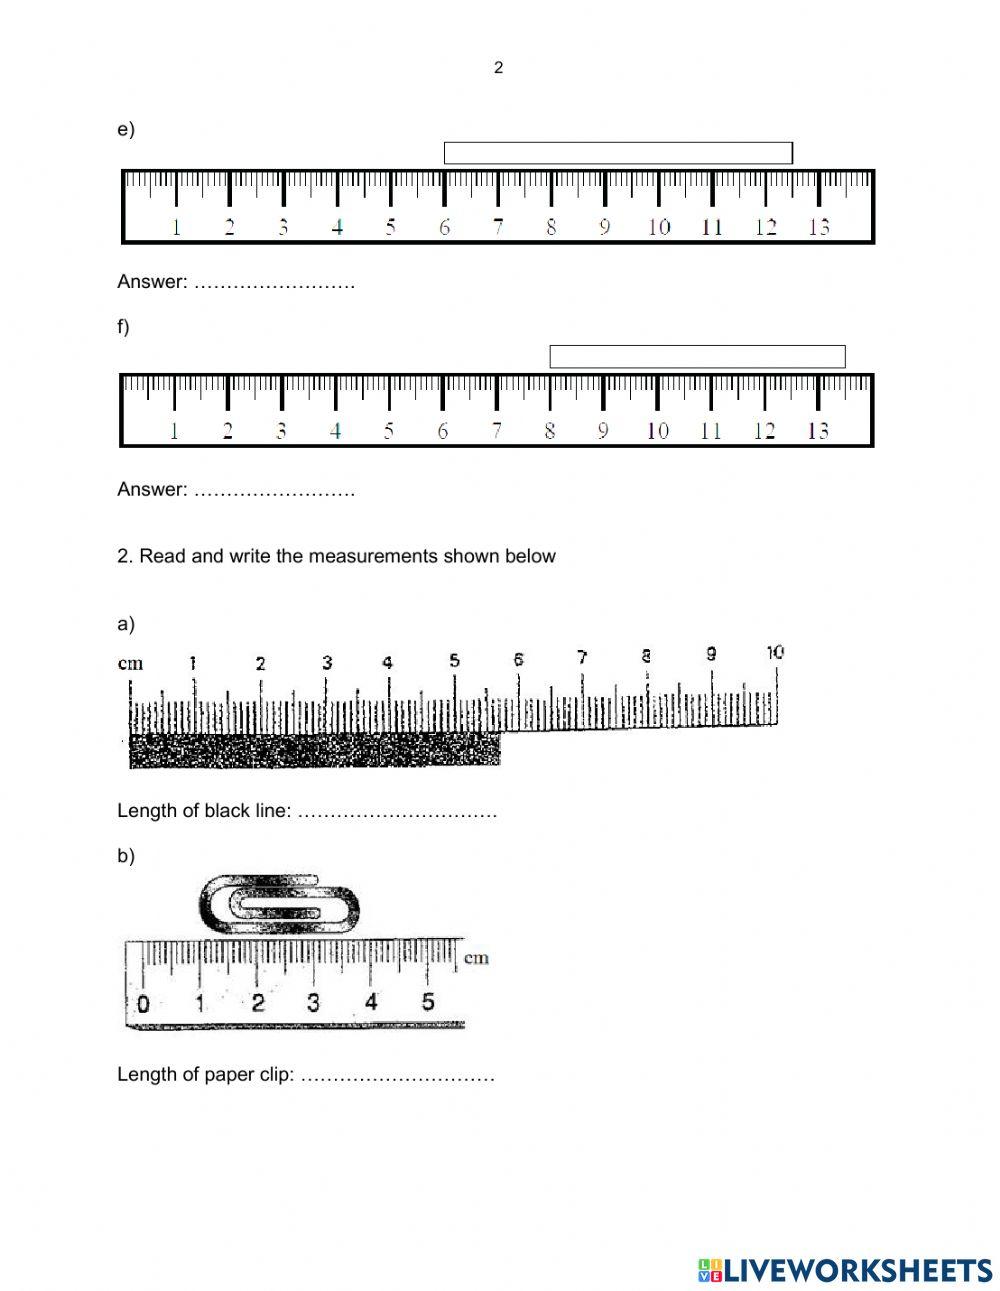 Exercise 1.7 (measuring length part 1)